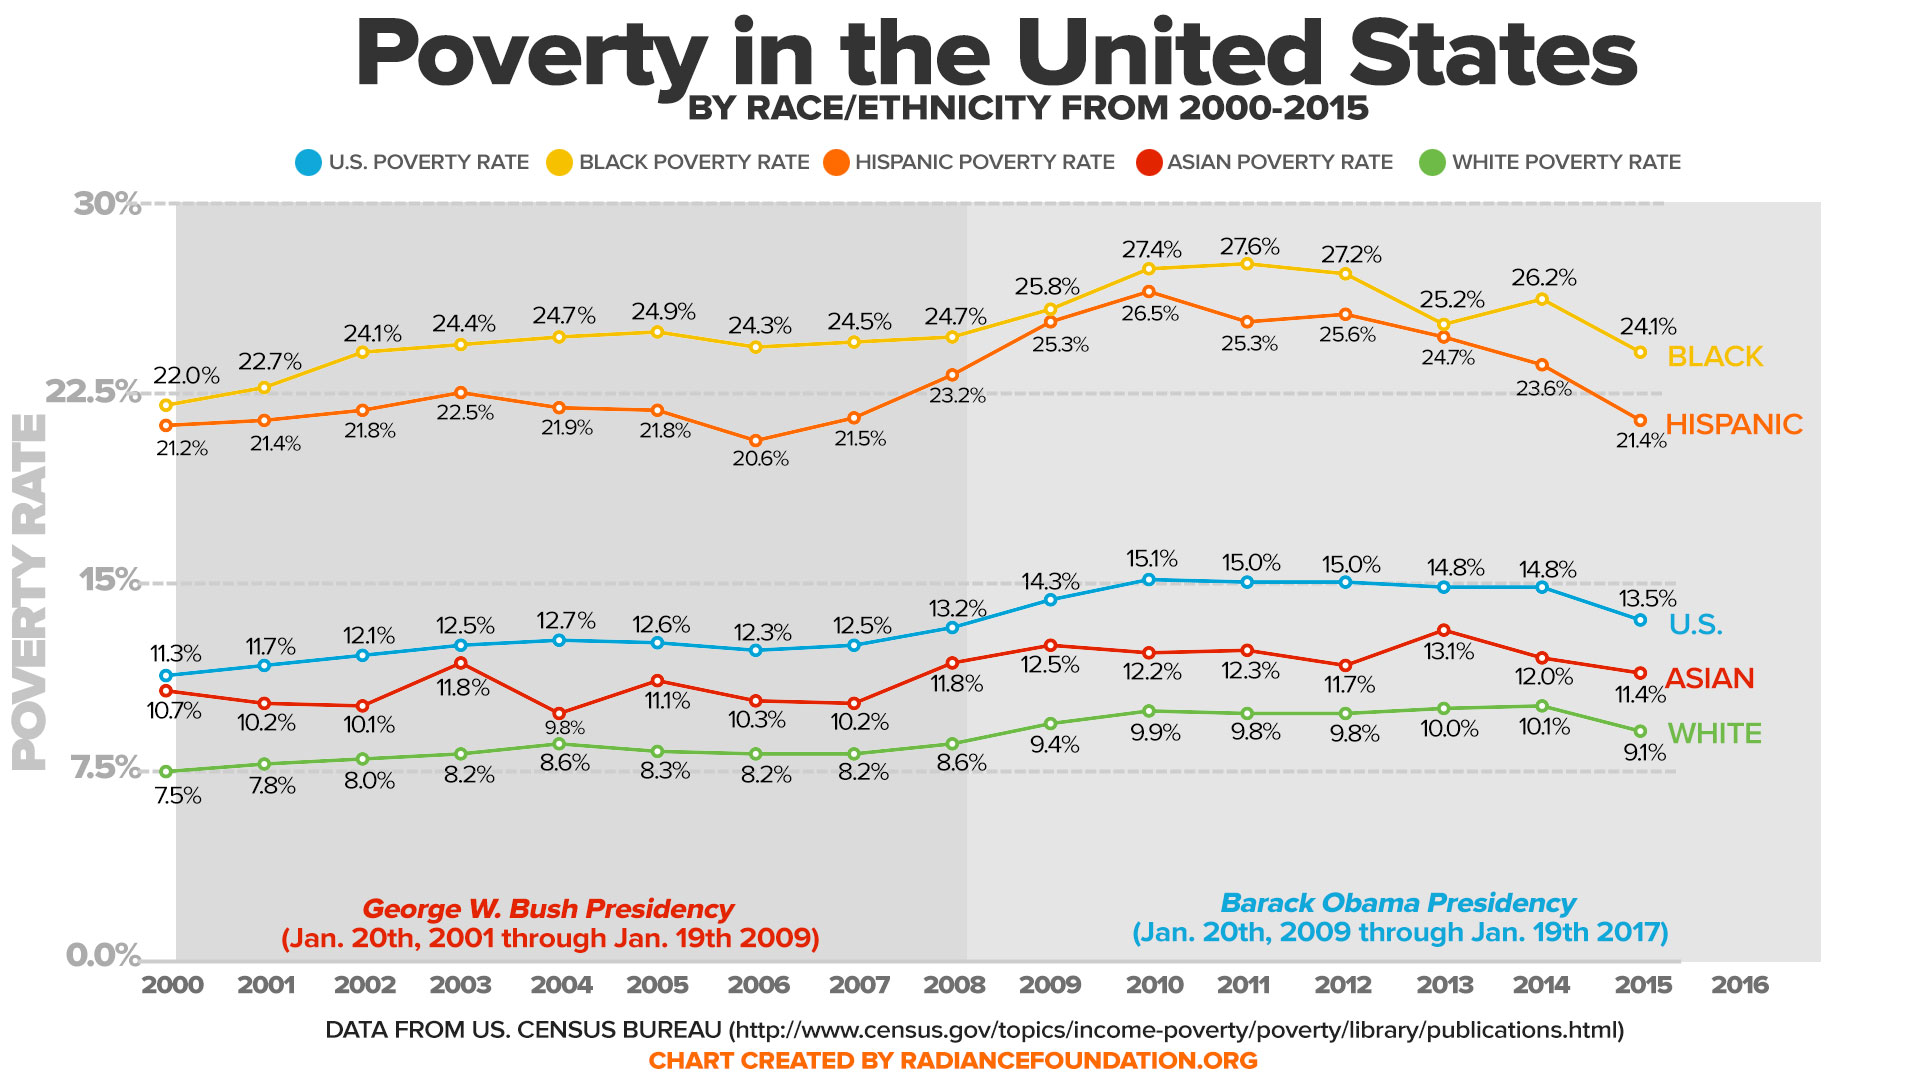 Poverty in the United States by Race/Ethnicity